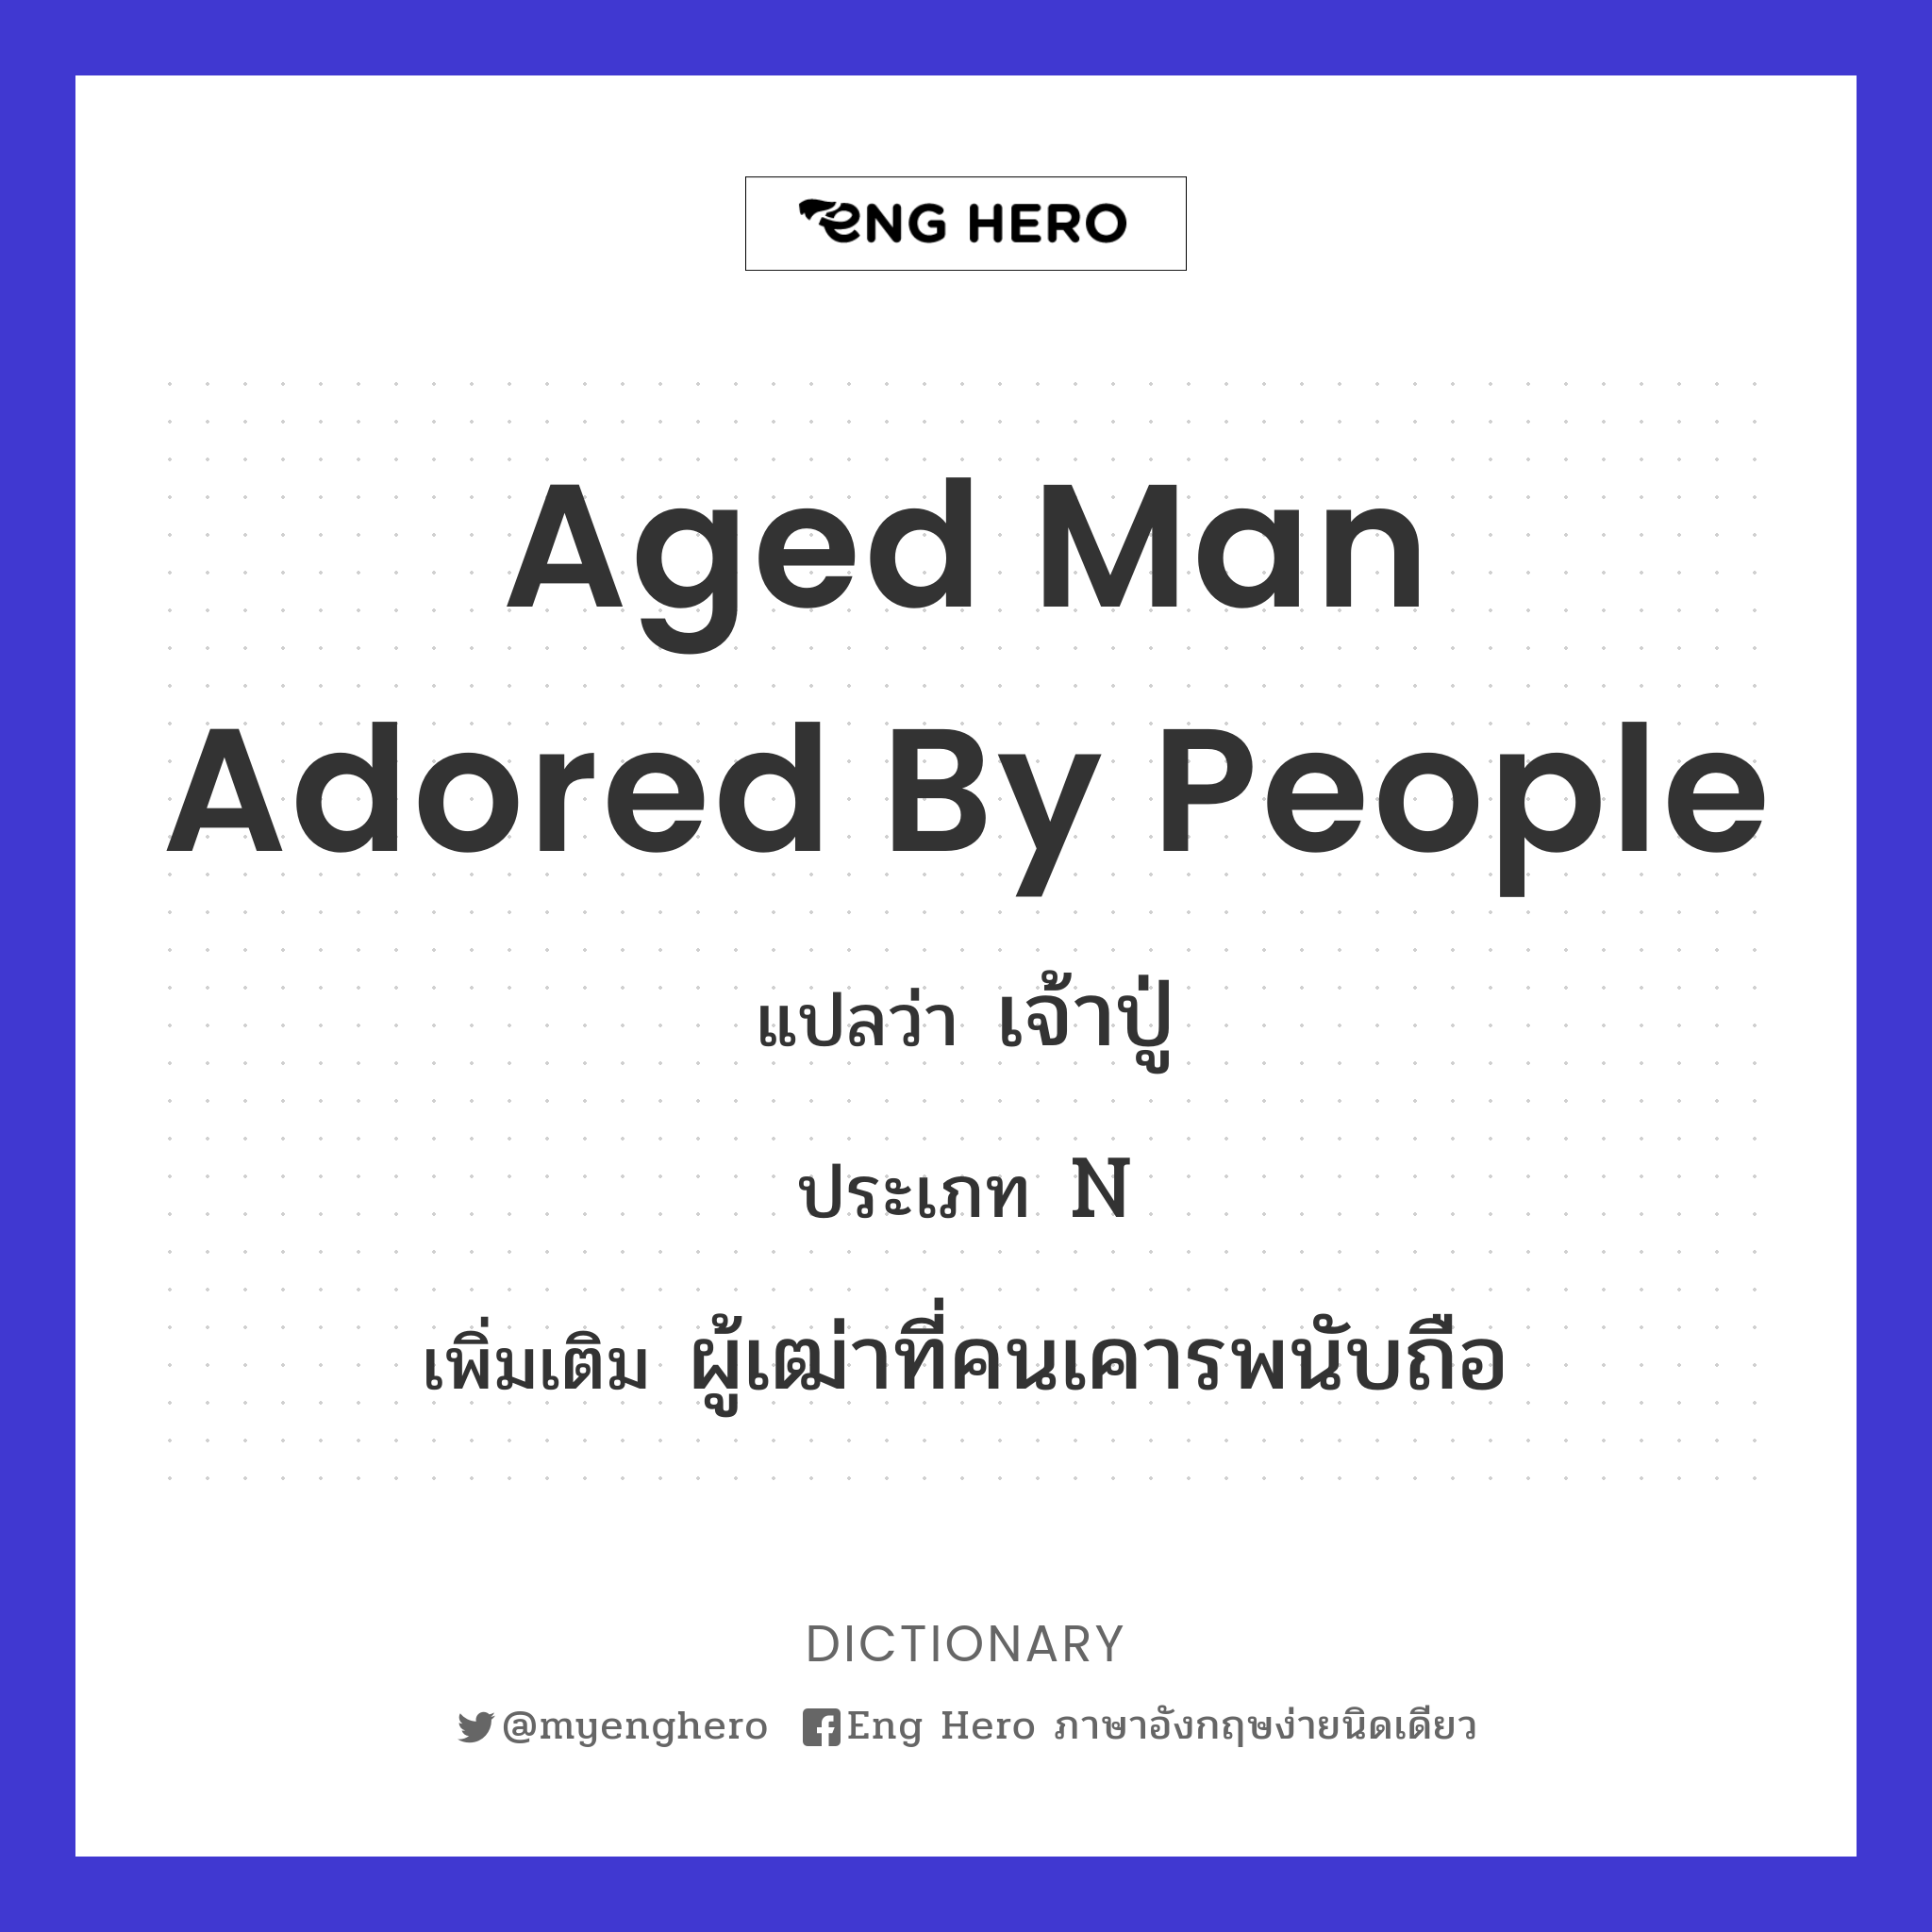 aged man adored by people